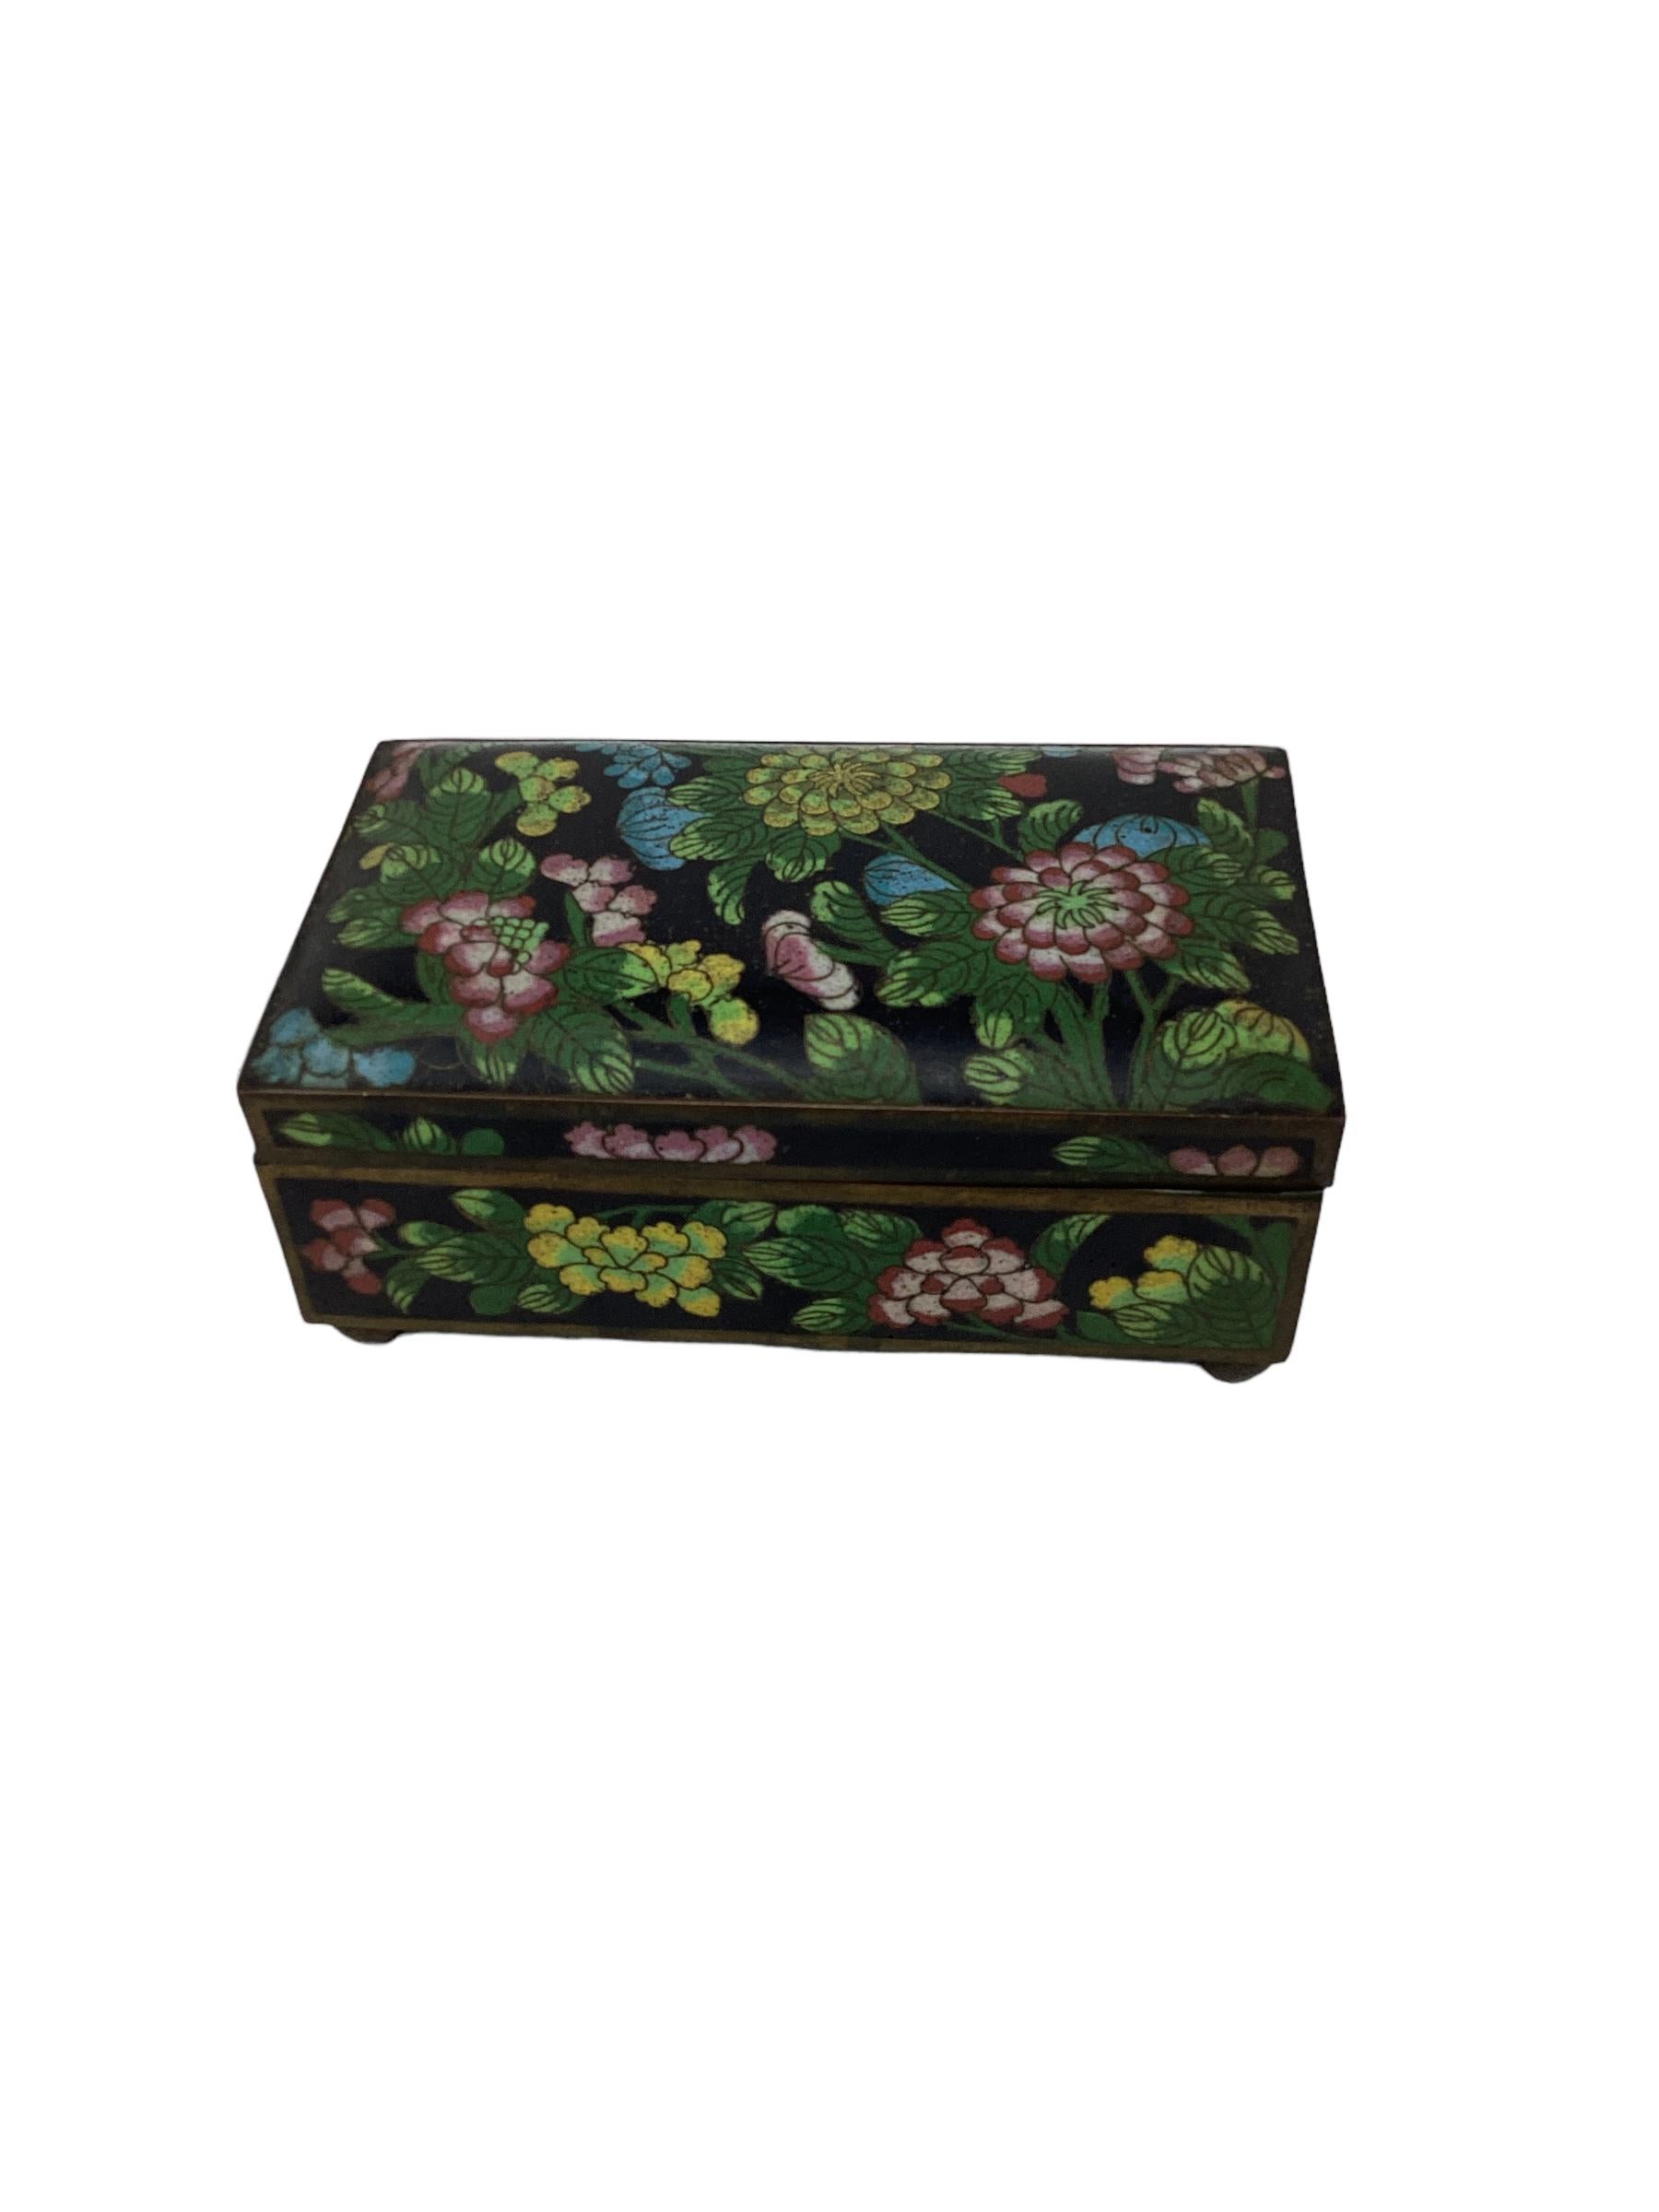 Lovely Chinese export cloisonné box made of brass and enameled with a beautiful floral pattern resting on ball feet. This decorative box was most likely a cigarette box or trinket box and would make a great desk accessory or cocktail table